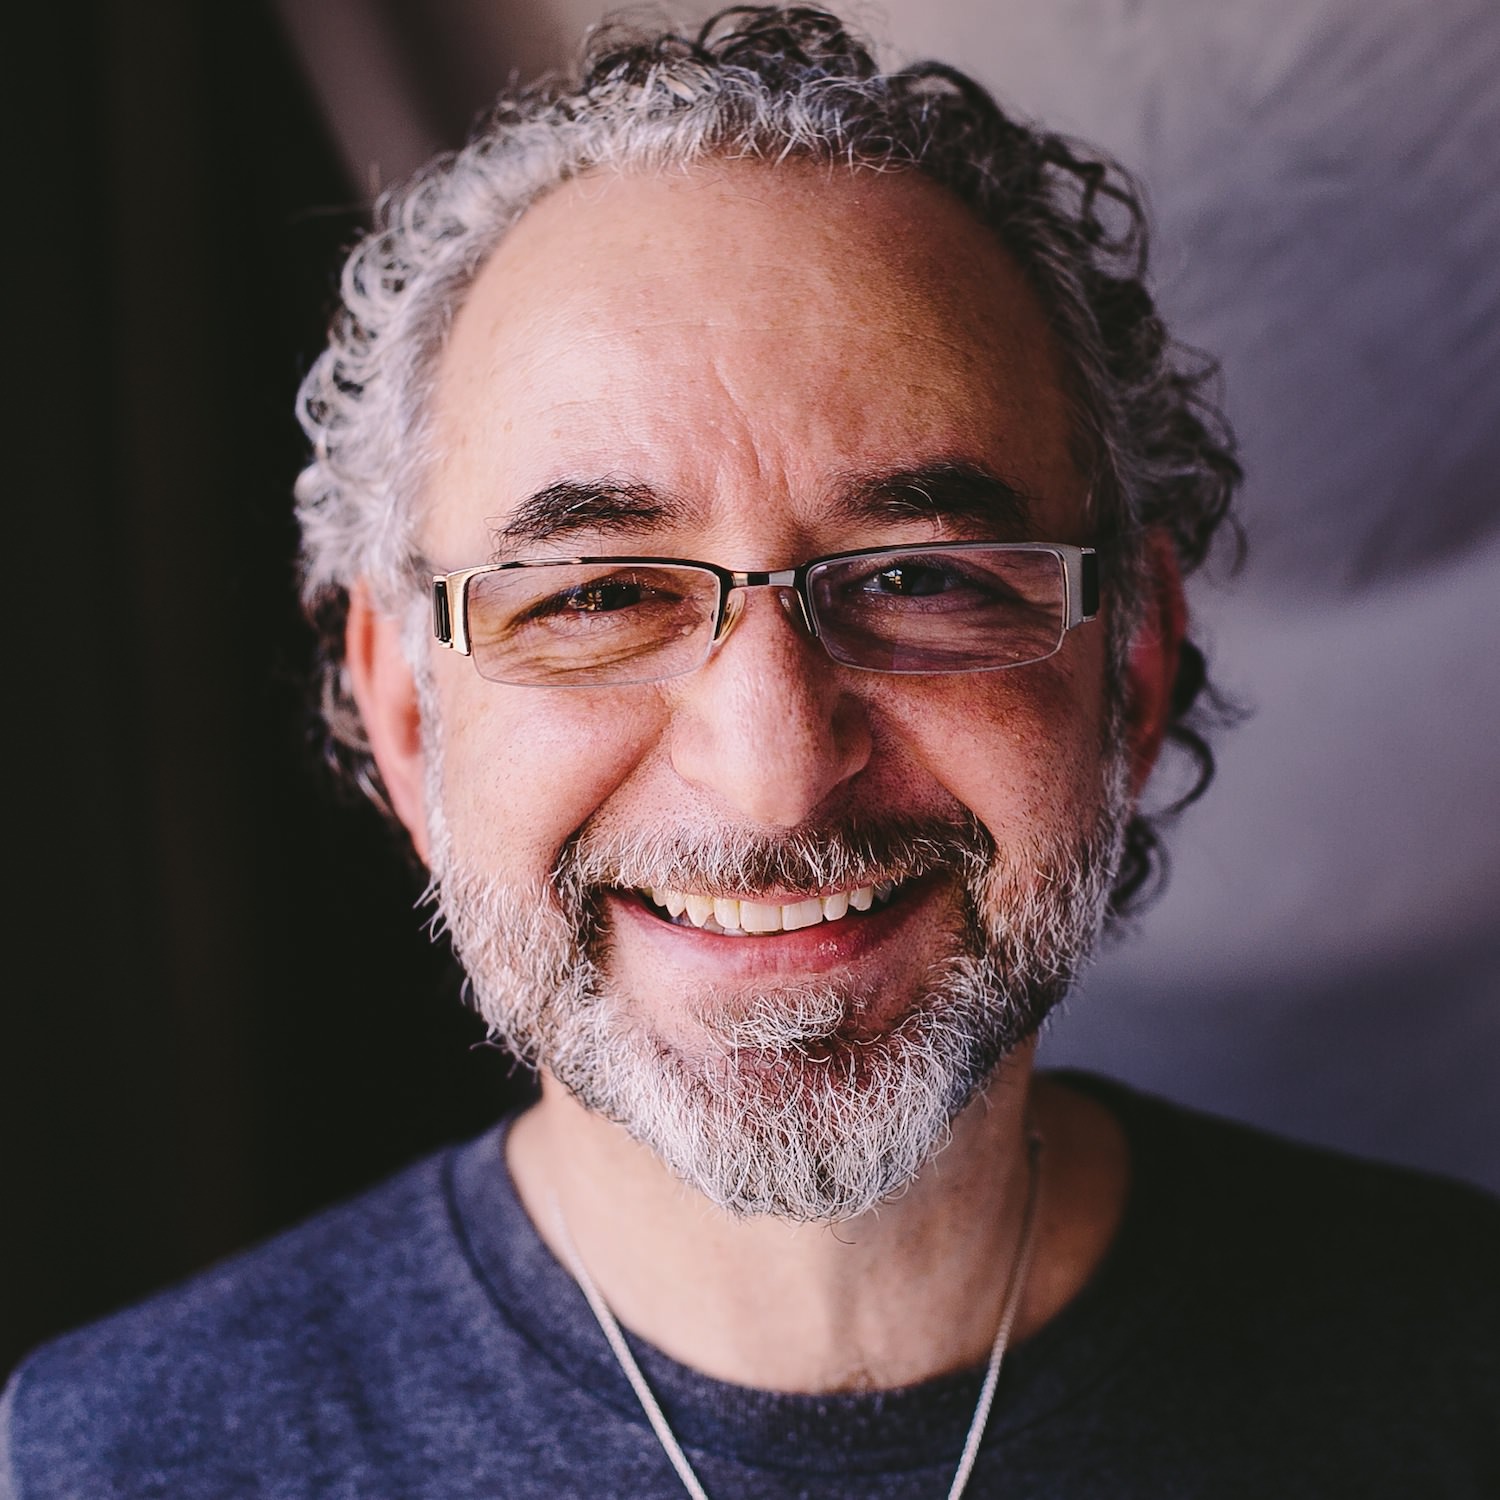 Alan Hirsch, author and missional pioneer